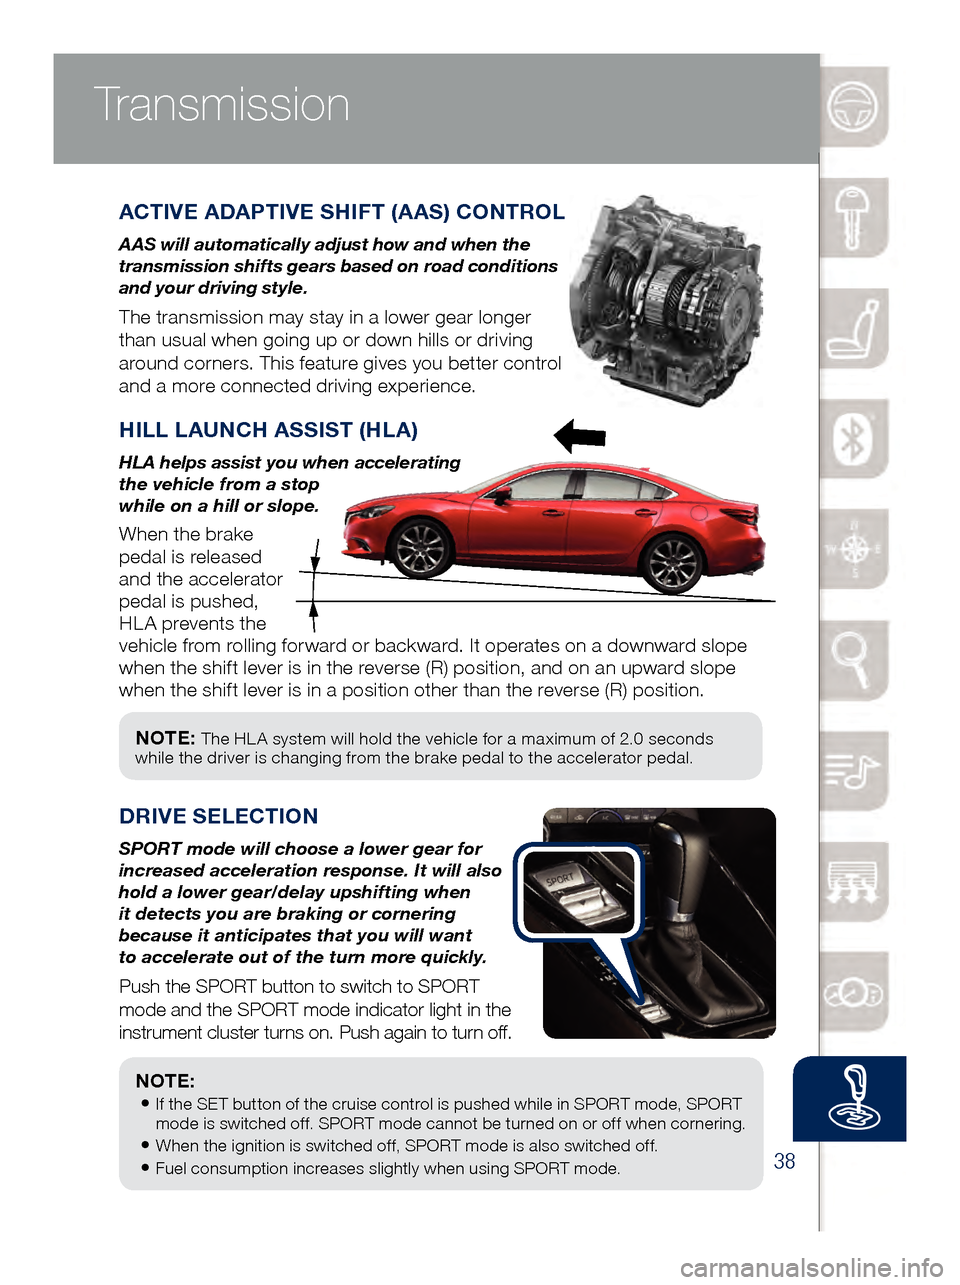 MAZDA MODEL 6 2017  Quick Start Guide (in English) 38
NOTE: The HL A system will hold the vehicle for a maximum of 2.0 seconds 
while the driver is changing from the brake pedal to the accelerator pedal.
Transmission
ACTIVE ADAPTIVE SHIFT (AAS) CONTRO